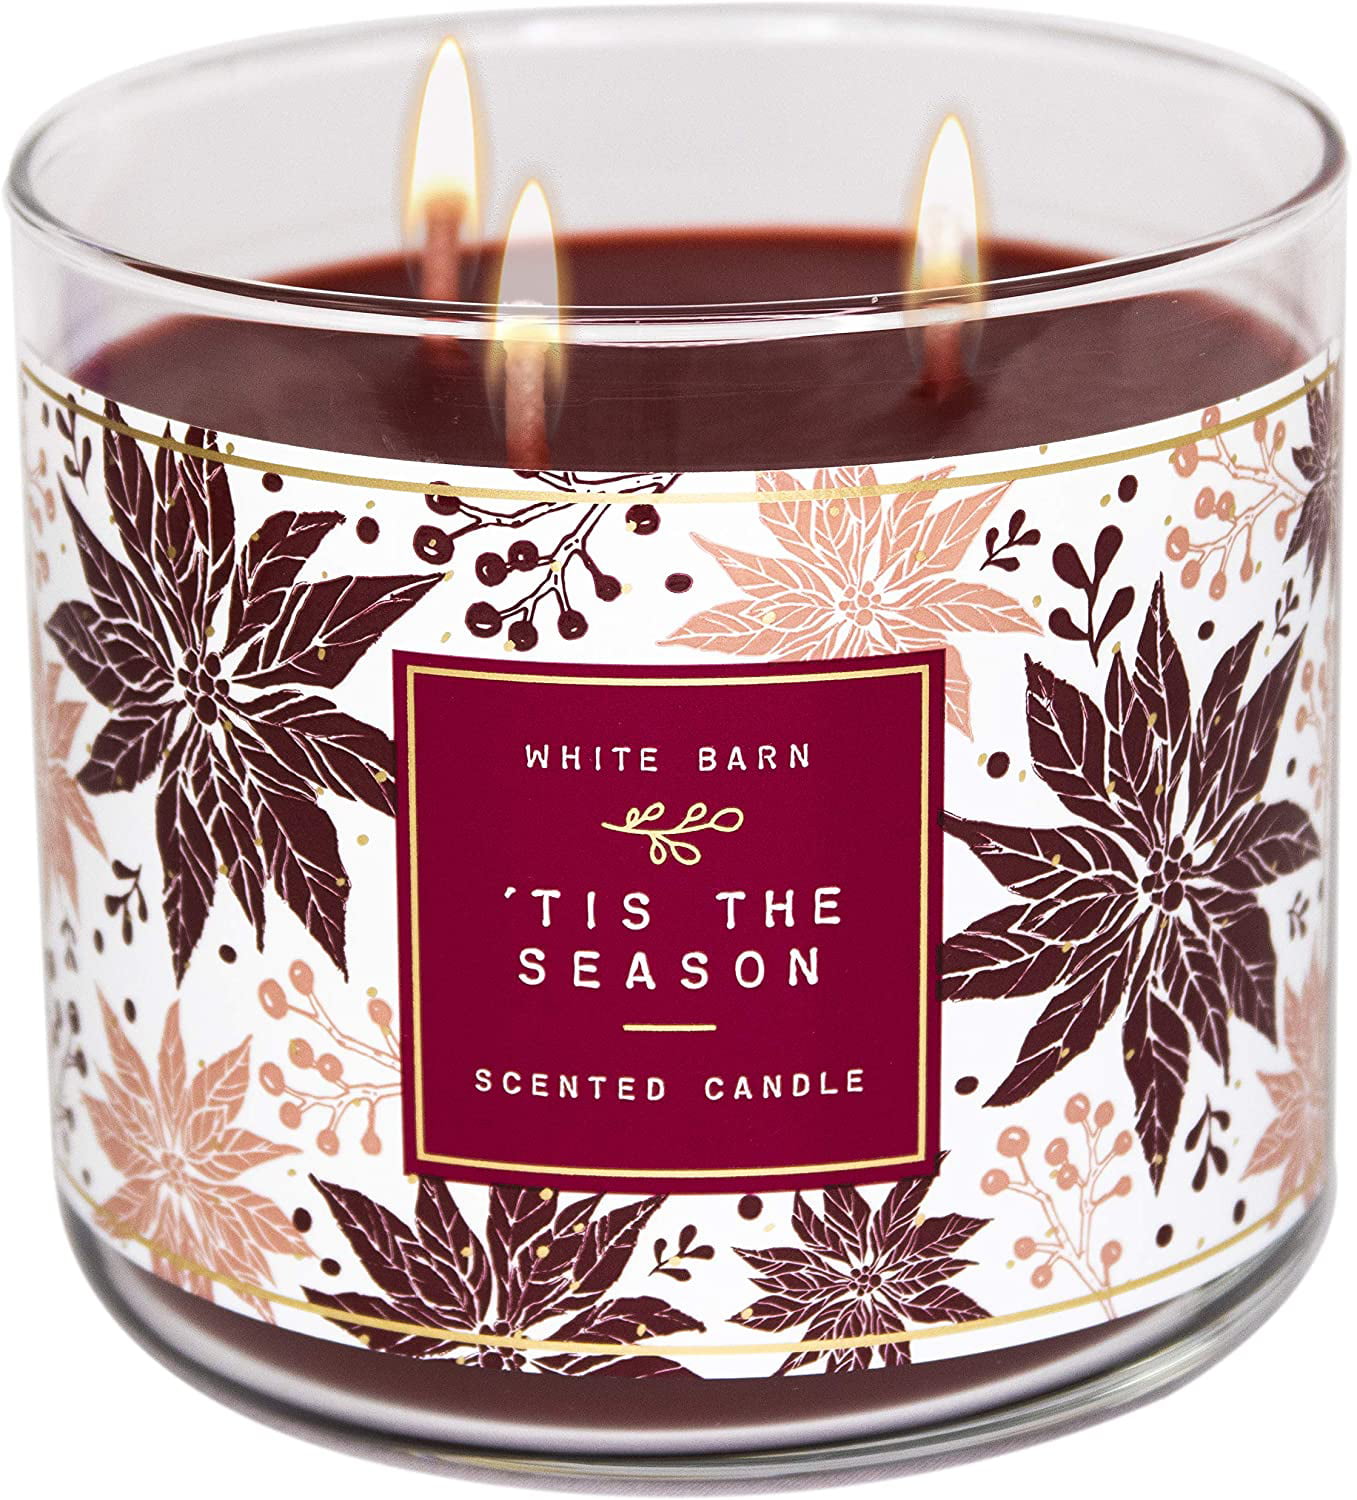 Bath & Body Works ´Tis the Season 3 Wick Scented Candle 14.5 oz 